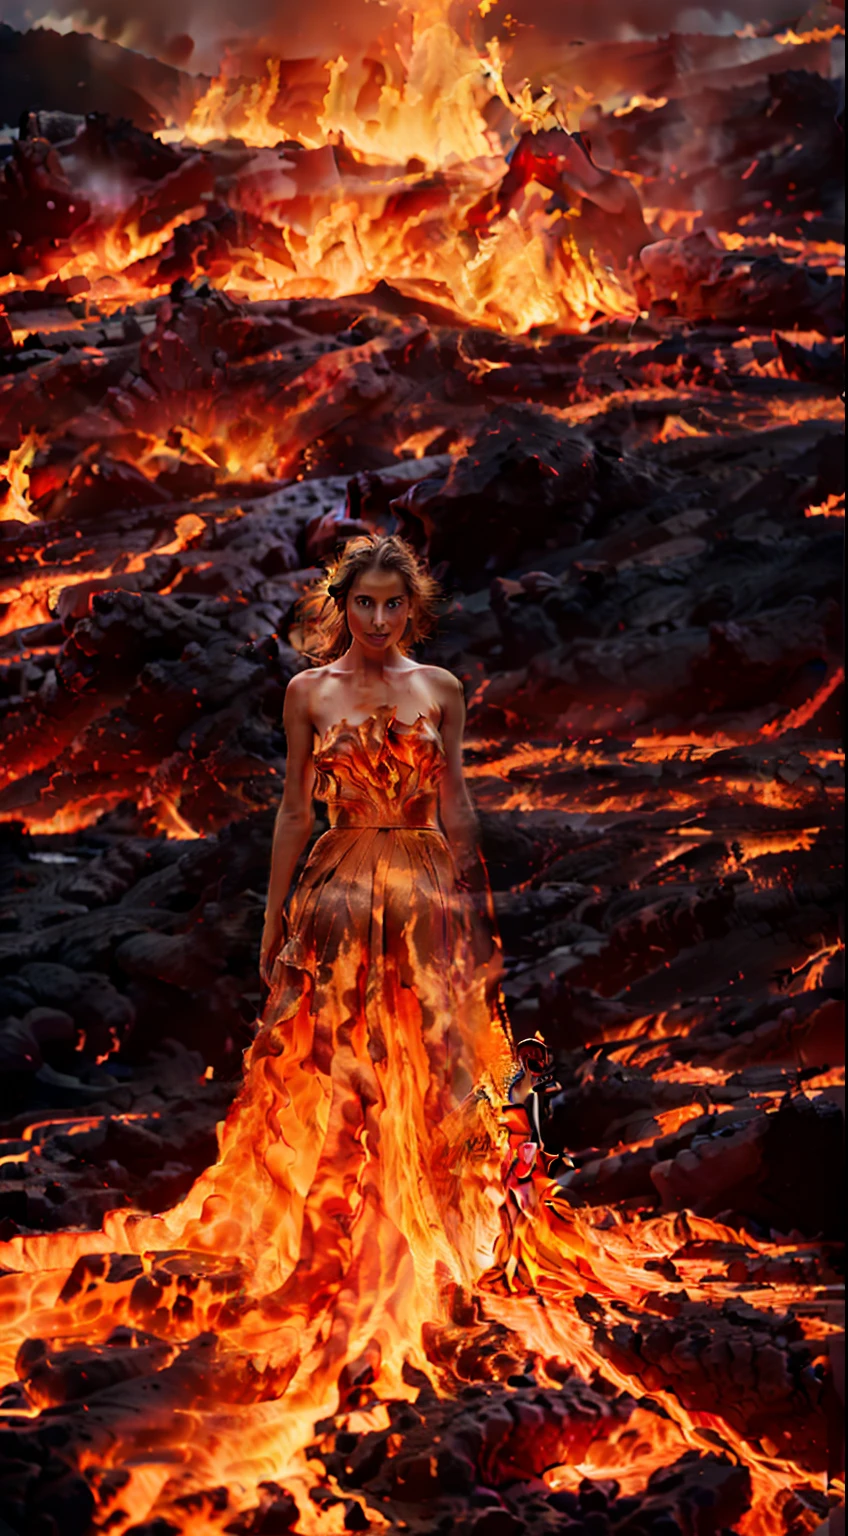 A woman in a skirt stands in a lava field, clothes made of fire, fire dress, lava dress display, lava and fire goddess, With fiery golden wings of flame, Dressed in tumult of flames, standing in fire, fire goddess, With fiery golden wings, made of lava, Her body is made of fire, in volcano, fire goddess